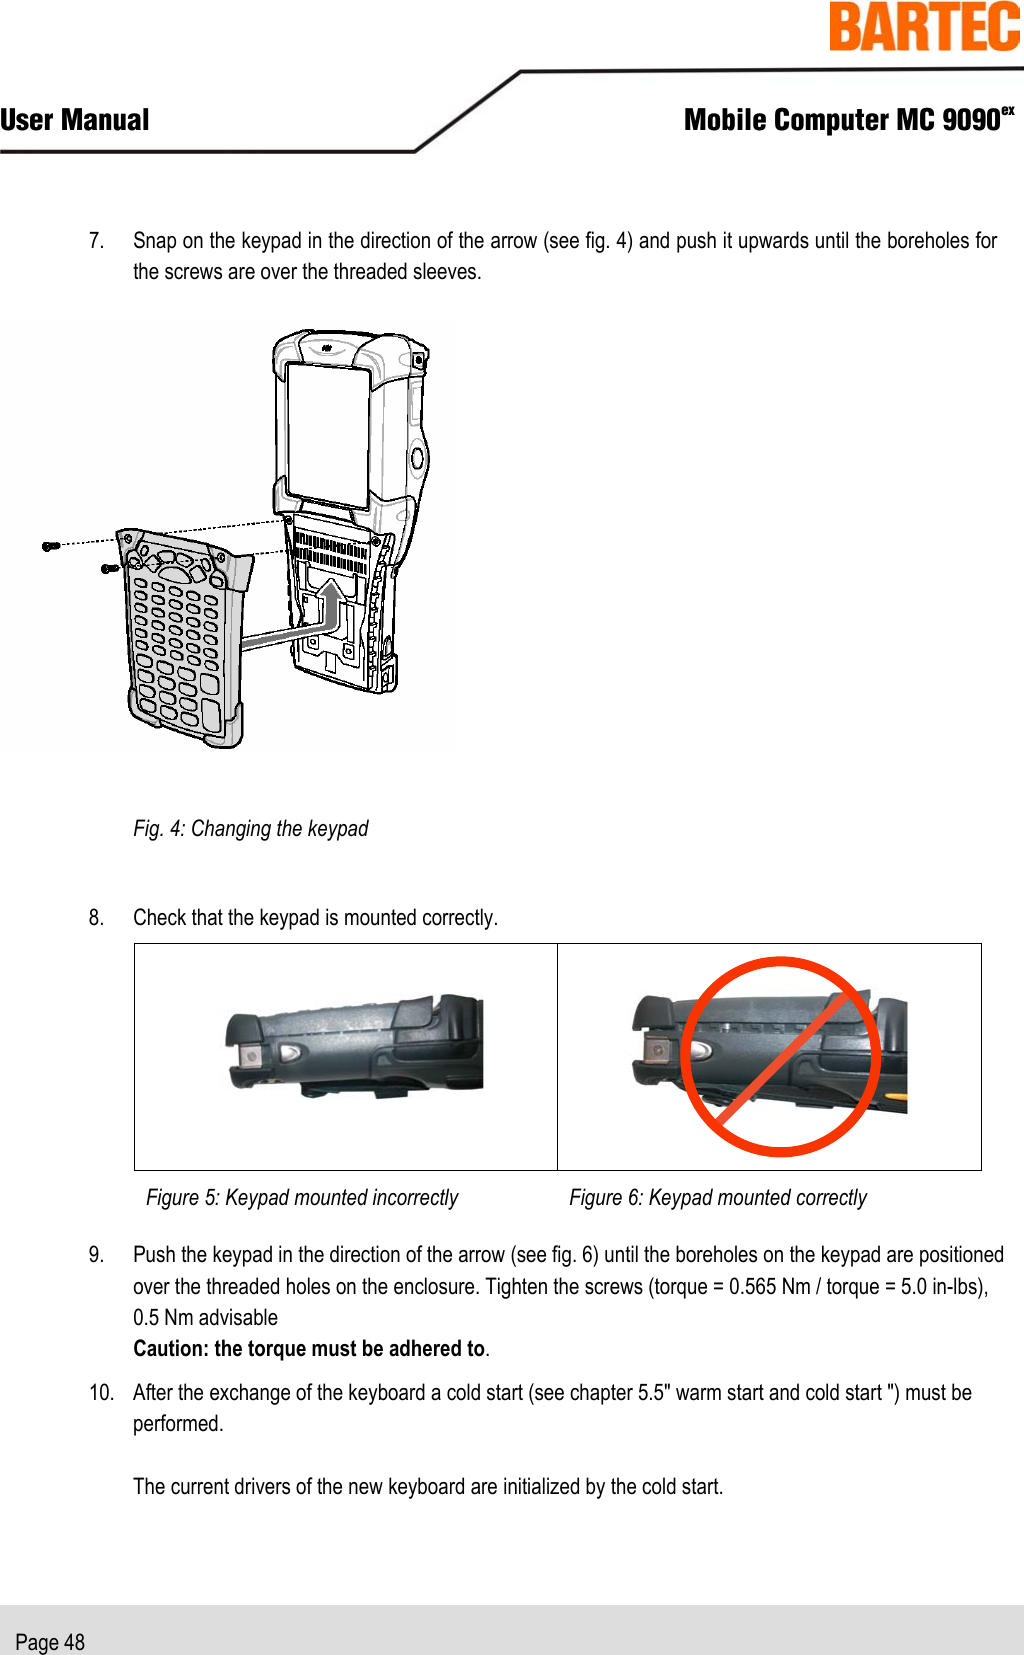  User Manual  Mobile Computer MC 9090ex   Page 48  7. Snap on the keypad in the direction of the arrow (see fig. 4) and push it upwards until the boreholes for the screws are over the threaded sleeves.     Fig. 4: Changing the keypad  8. Check that the keypad is mounted correctly.     Figure 5: Keypad mounted incorrectly Figure 6: Keypad mounted correctly  9. Push the keypad in the direction of the arrow (see fig. 6) until the boreholes on the keypad are positioned over the threaded holes on the enclosure. Tighten the screws (torque = 0.565 Nm / torque = 5.0 in-lbs),  0.5 Nm advisable Caution: the torque must be adhered to. 10. After the exchange of the keyboard a cold start (see chapter 5.5&quot; warm start and cold start &quot;) must be performed.  The current drivers of the new keyboard are initialized by the cold start. 